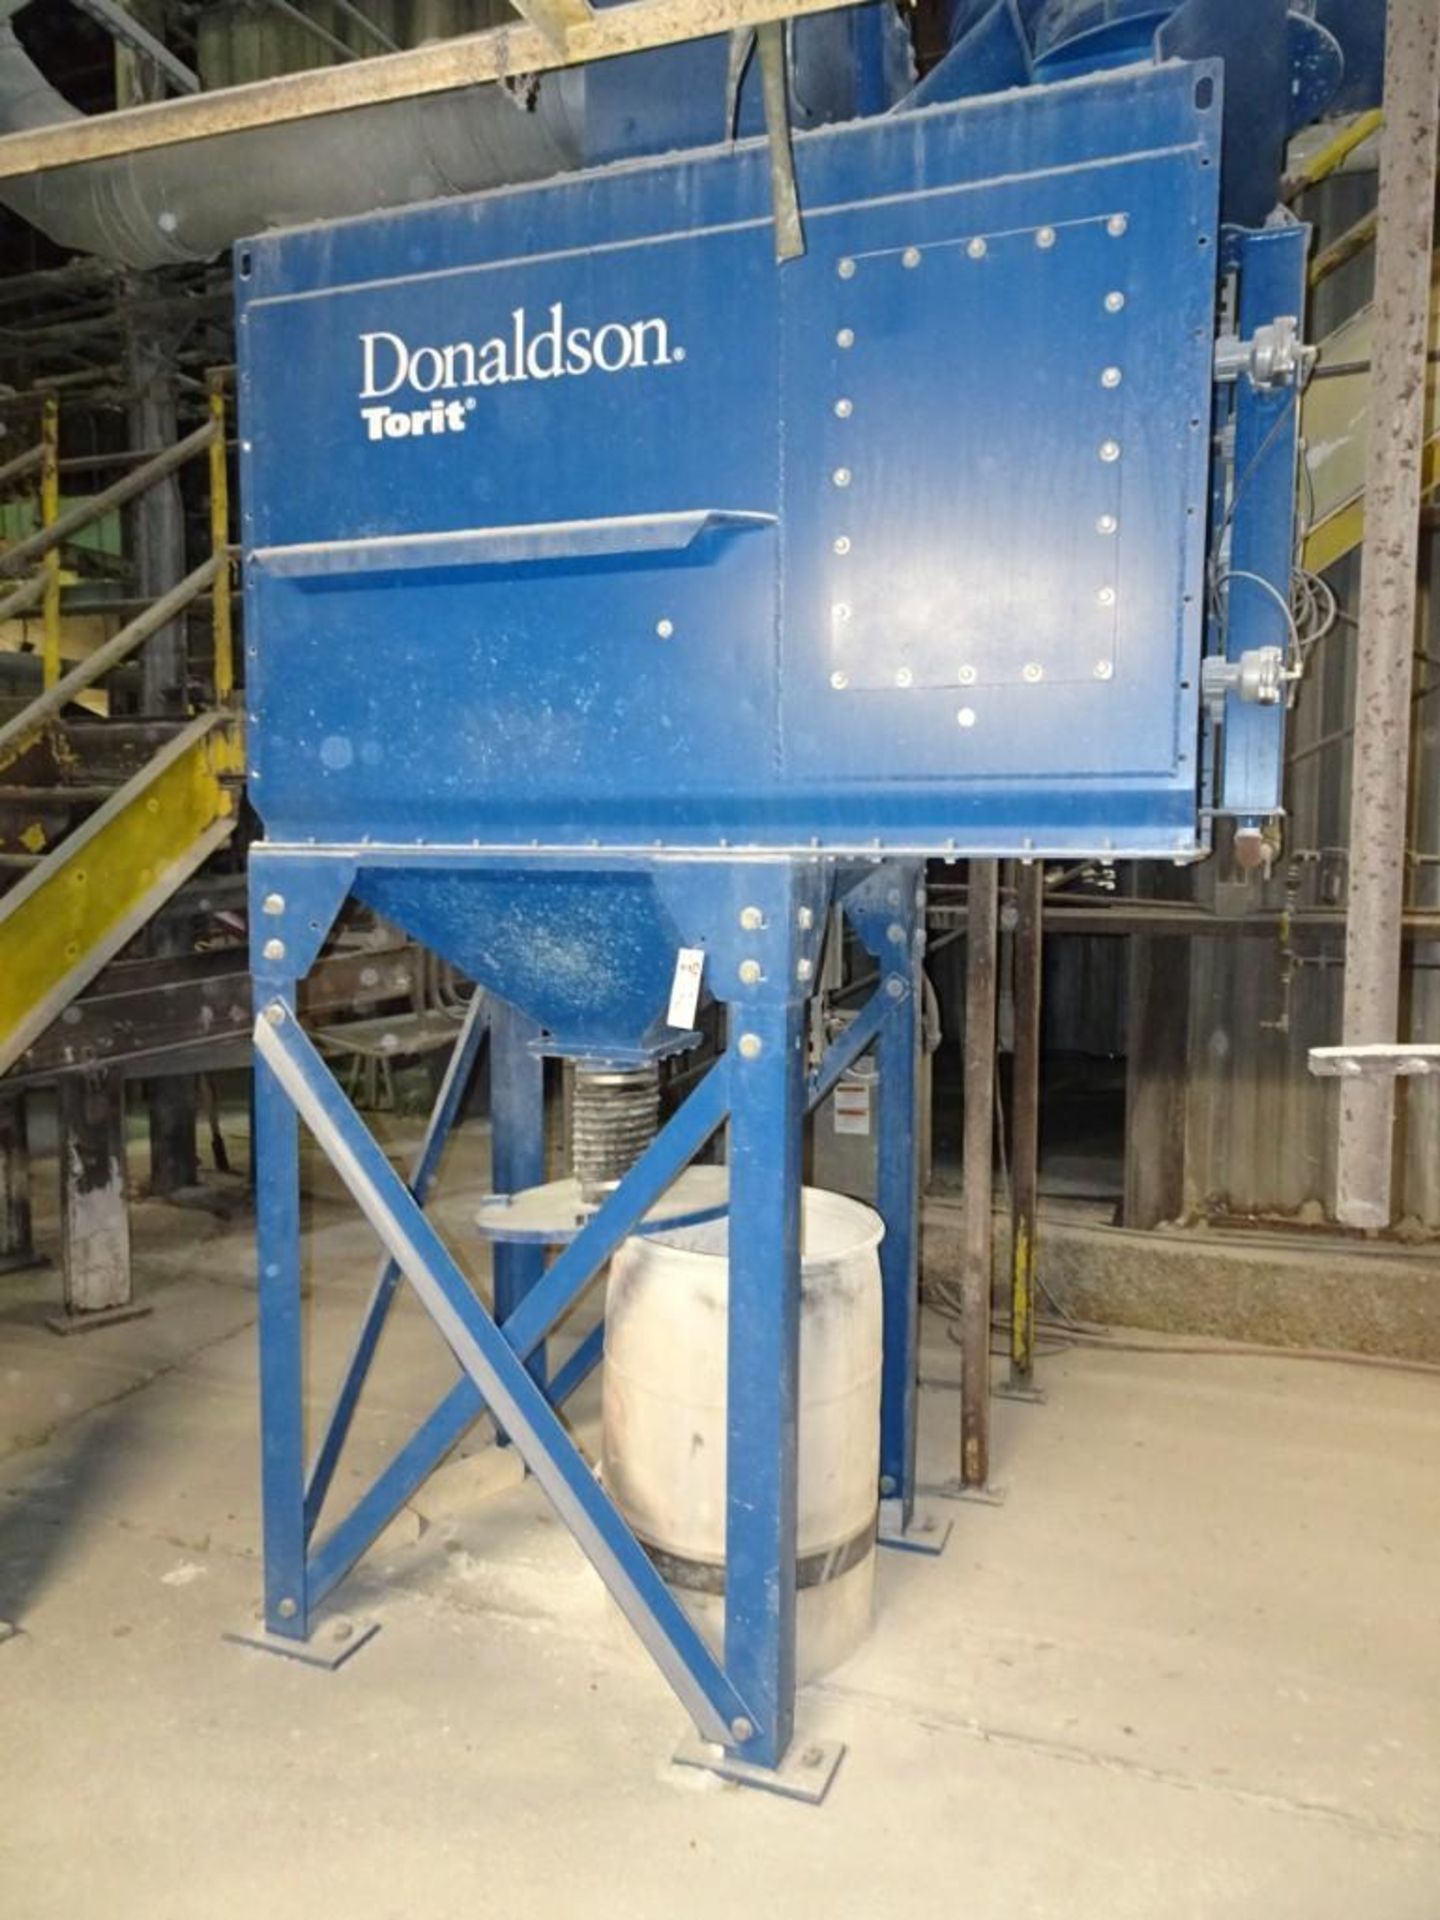 Donaldson DFE2-4 5 HP Dust Collector, s/n 12318169-L1-1 - Image 2 of 3